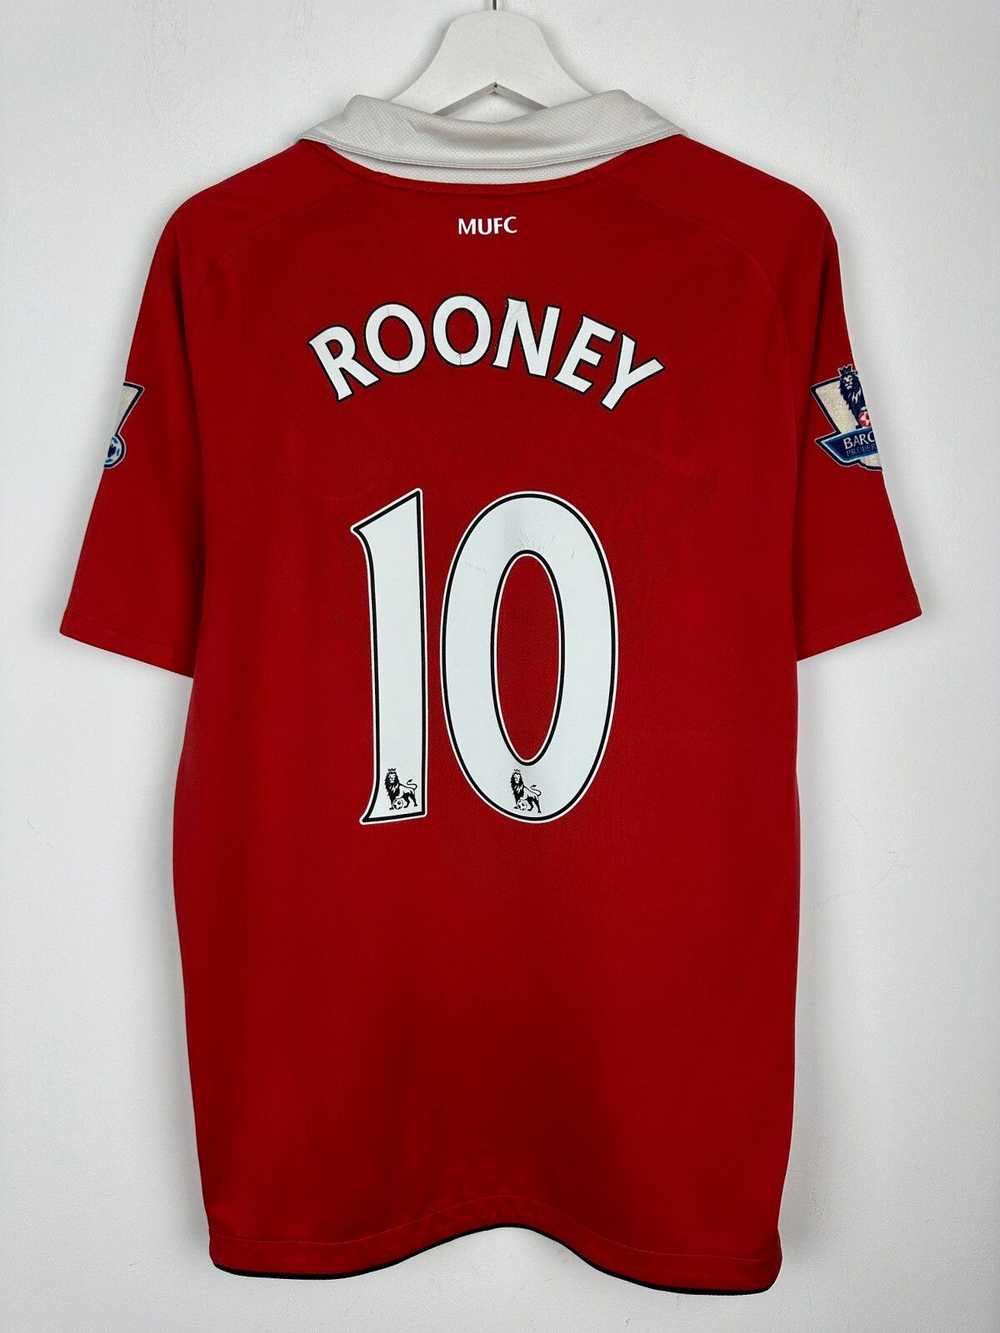 Jersey × Nike × Soccer Jersey #10 Rooney Manchest… - image 3